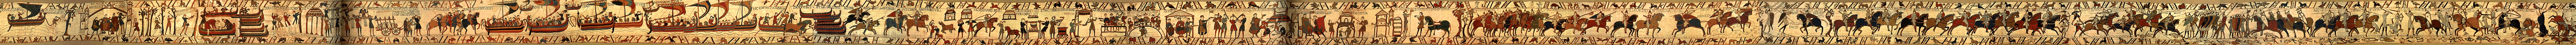 Image Of The Full Bayeux Tapestry